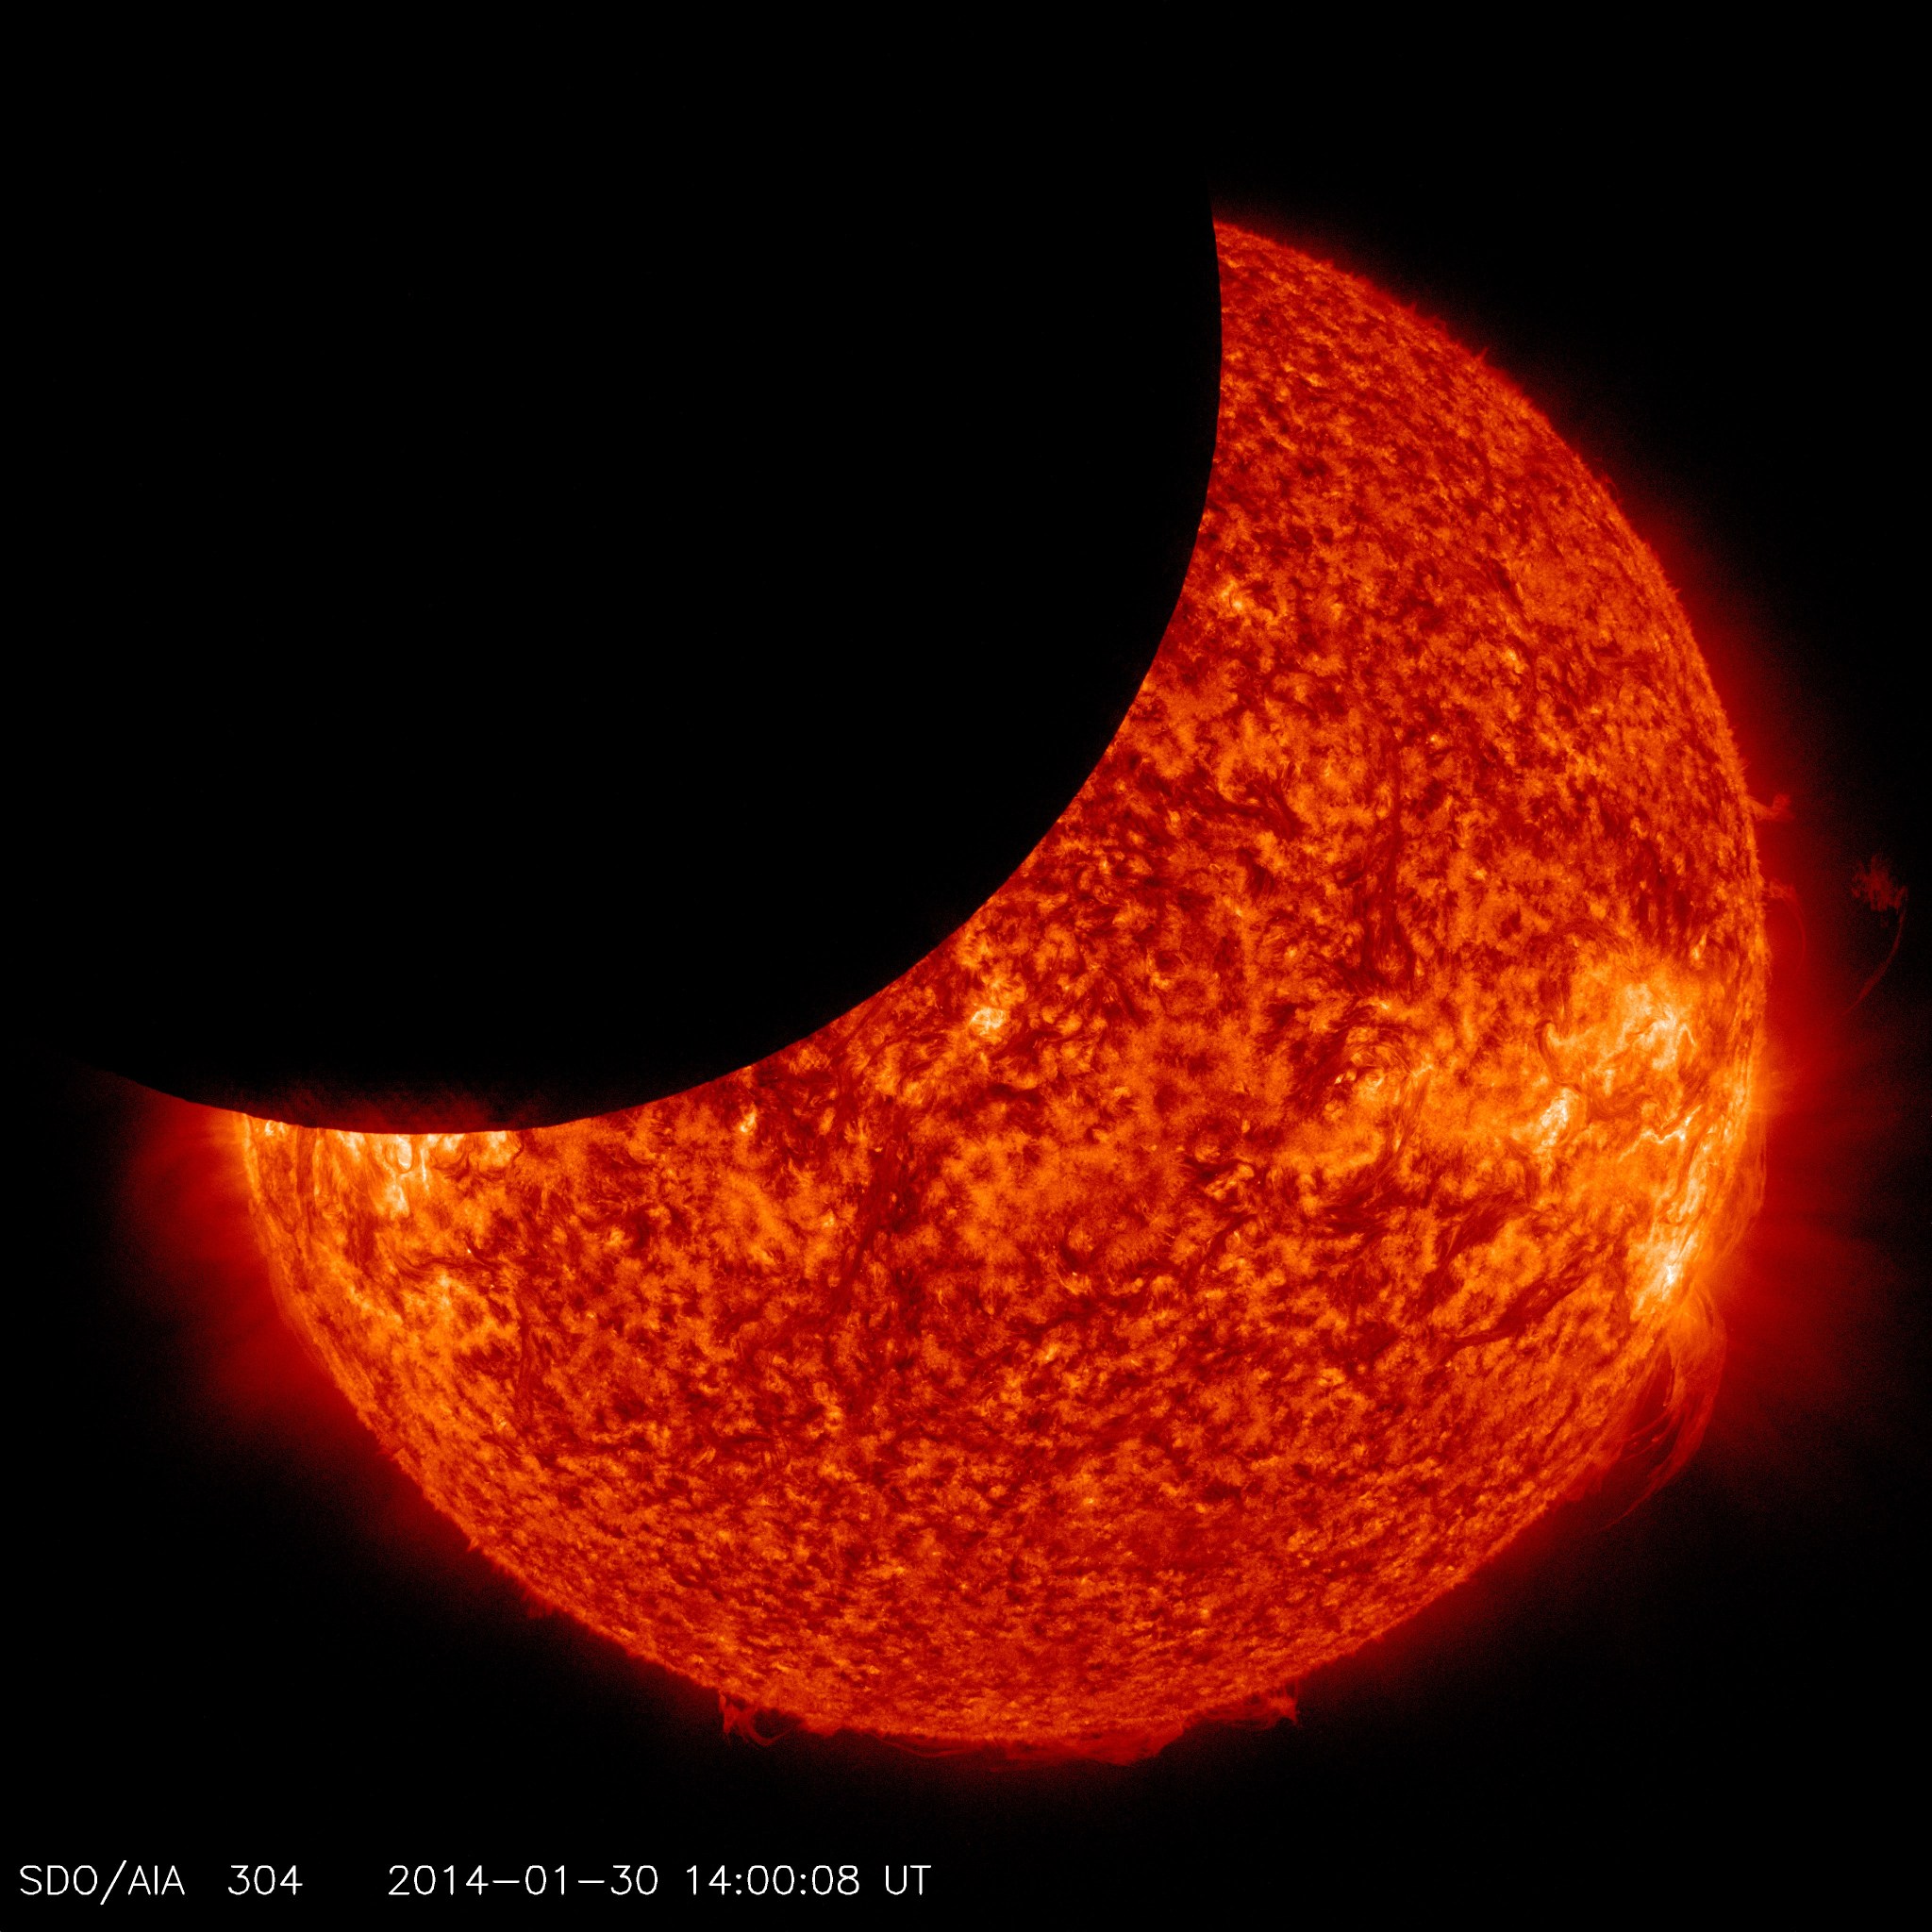 The Sun, seen in red with bright orange area, partially covered by black circle coming from the top left - the Moon.